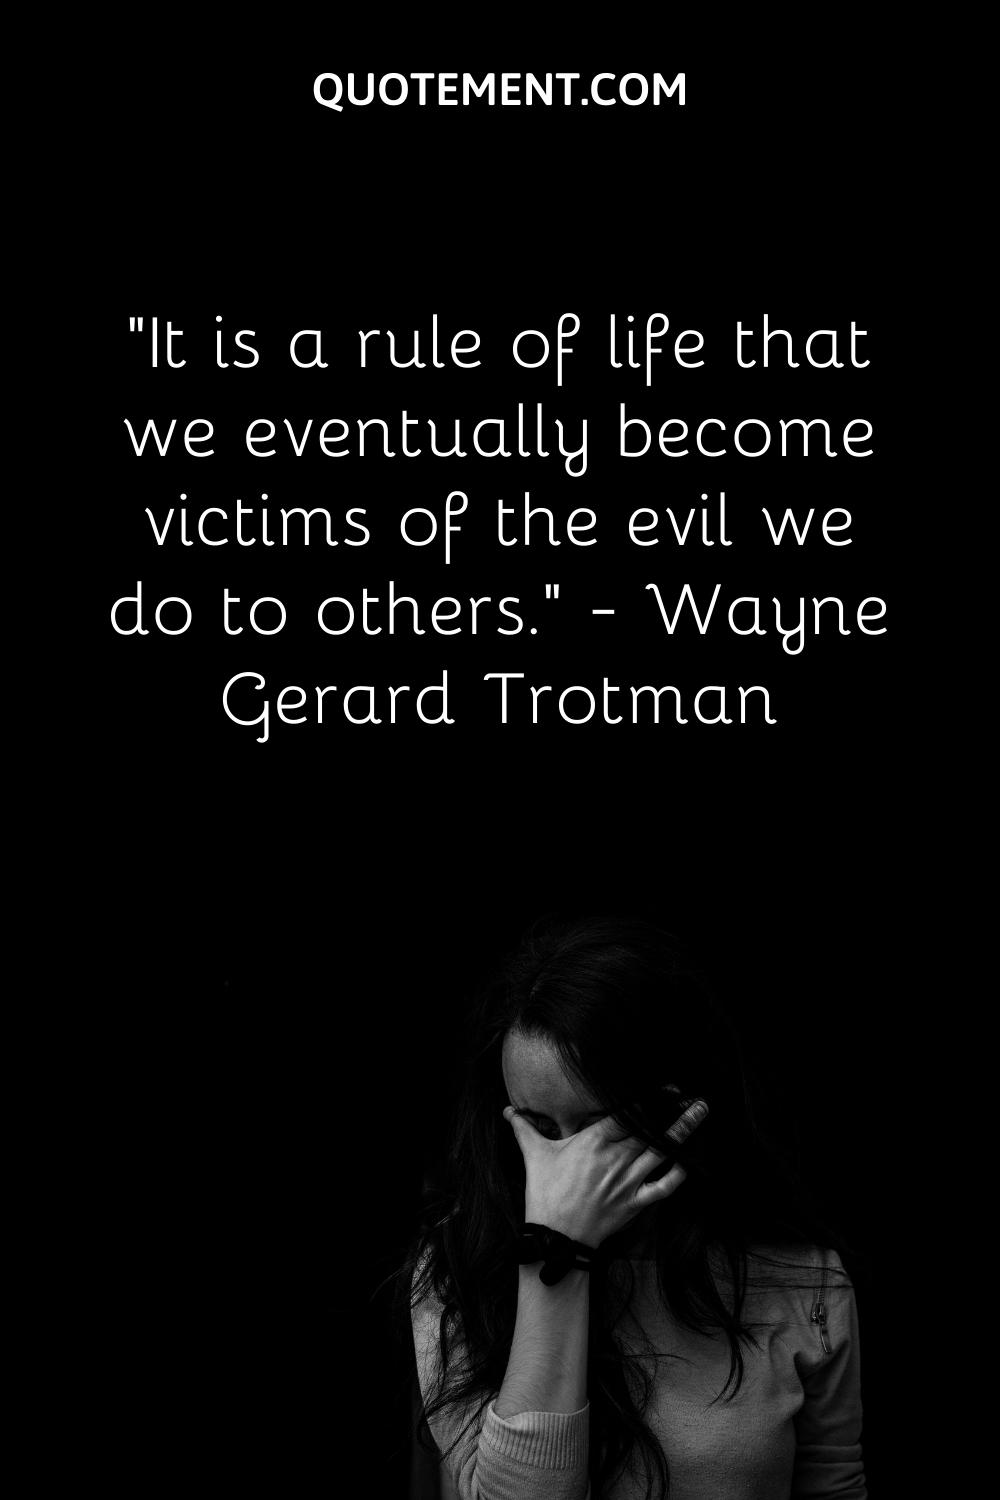 It is a rule of life that we eventually become victims of the evil we do to others